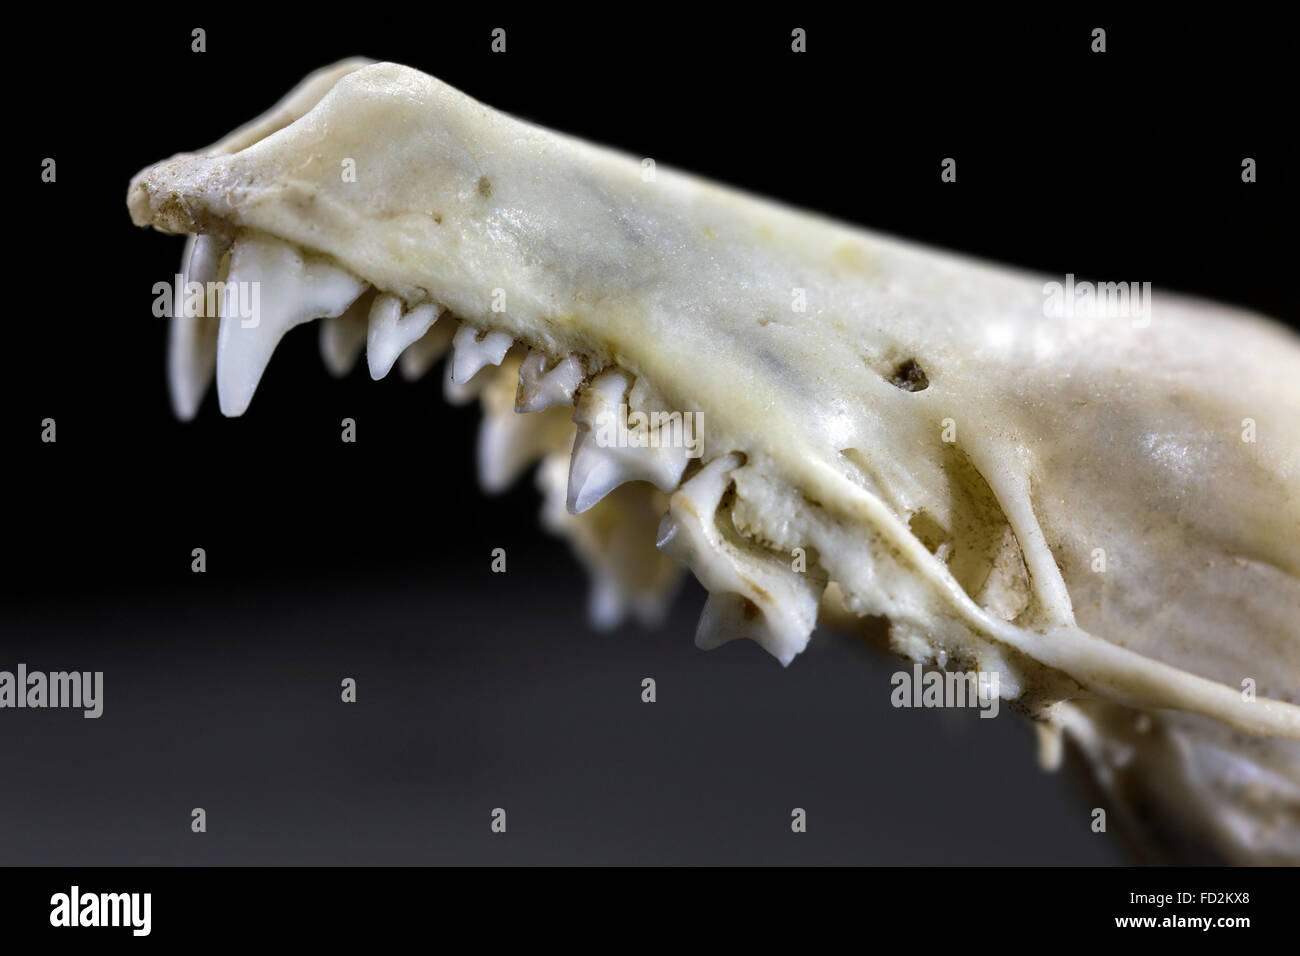 Close up upper jaw showing insectivorous spike-like incisors / front teeth and chewing molars of shrew mouse (Soricidae) Stock Photo